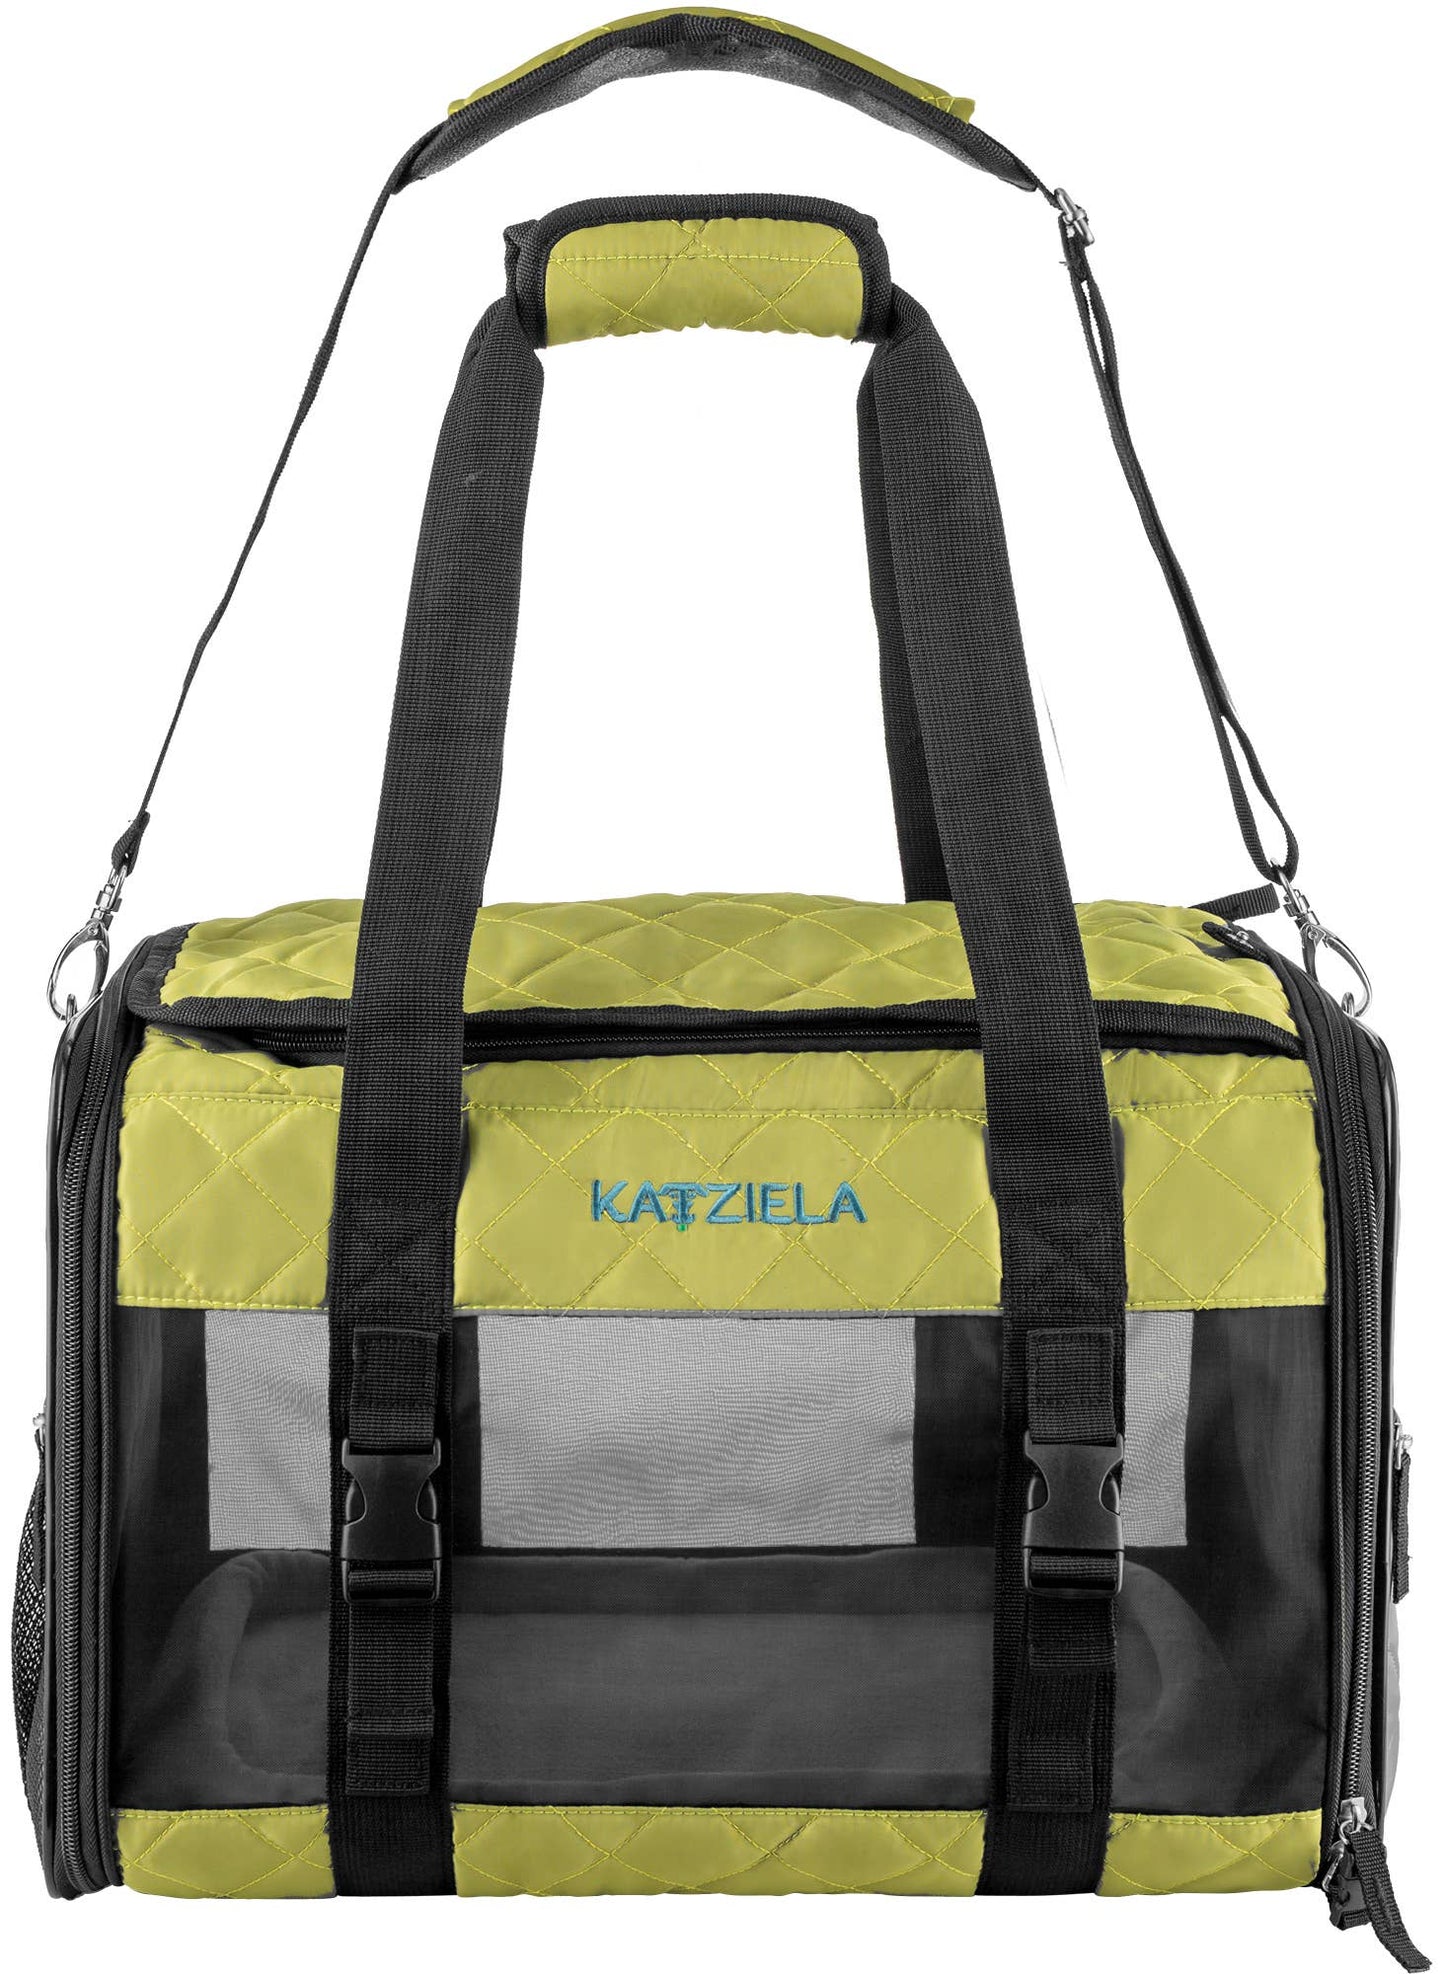 Katziela - QUILTED COMPANION - Olive Green  Image